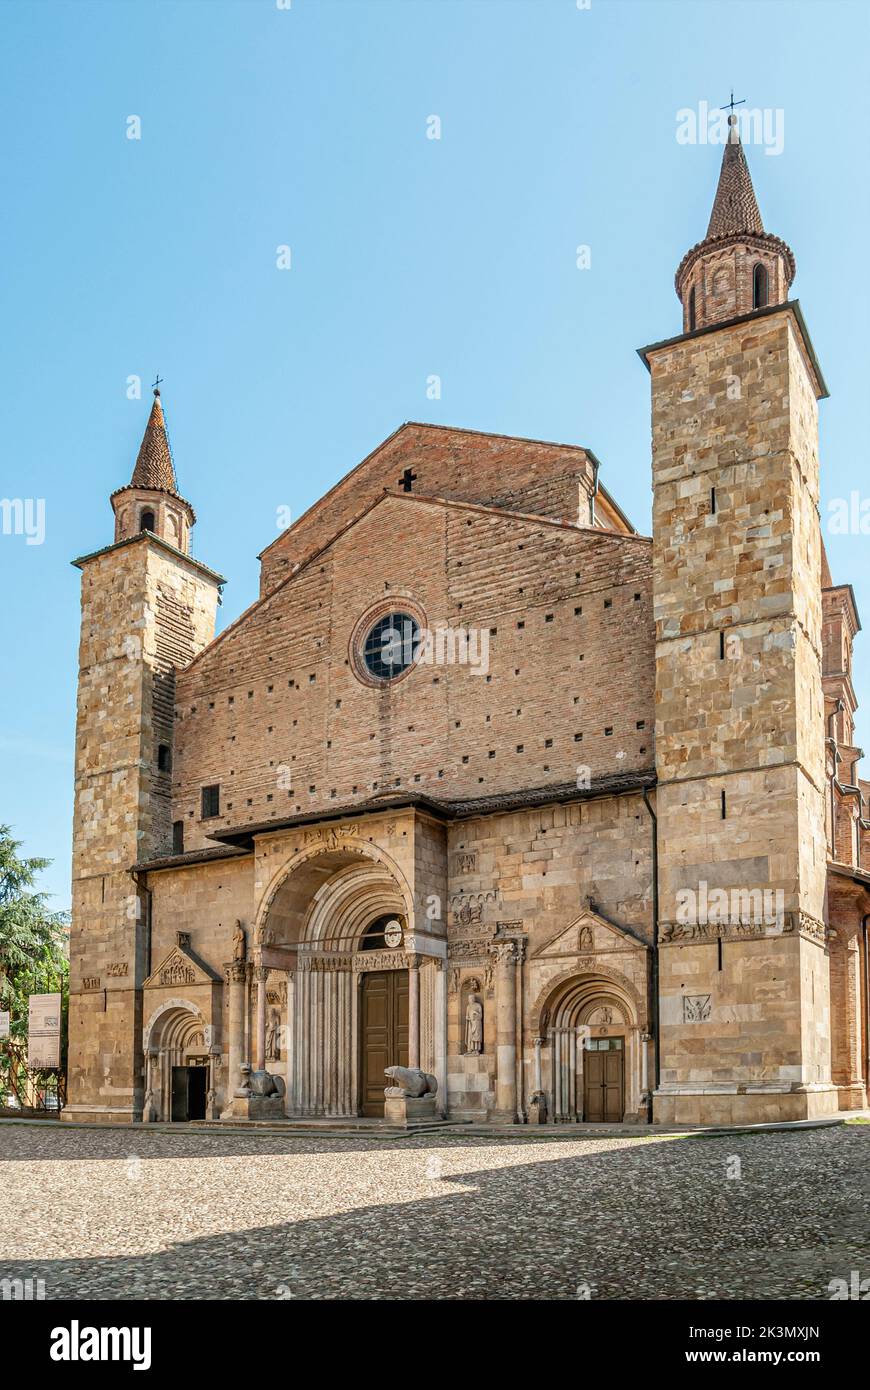 The Cathedral is Fidenza's most famous building,which dates from the 12th century and is dedicated to Domninus of Fidenza, who was martyred by order o Stock Photo